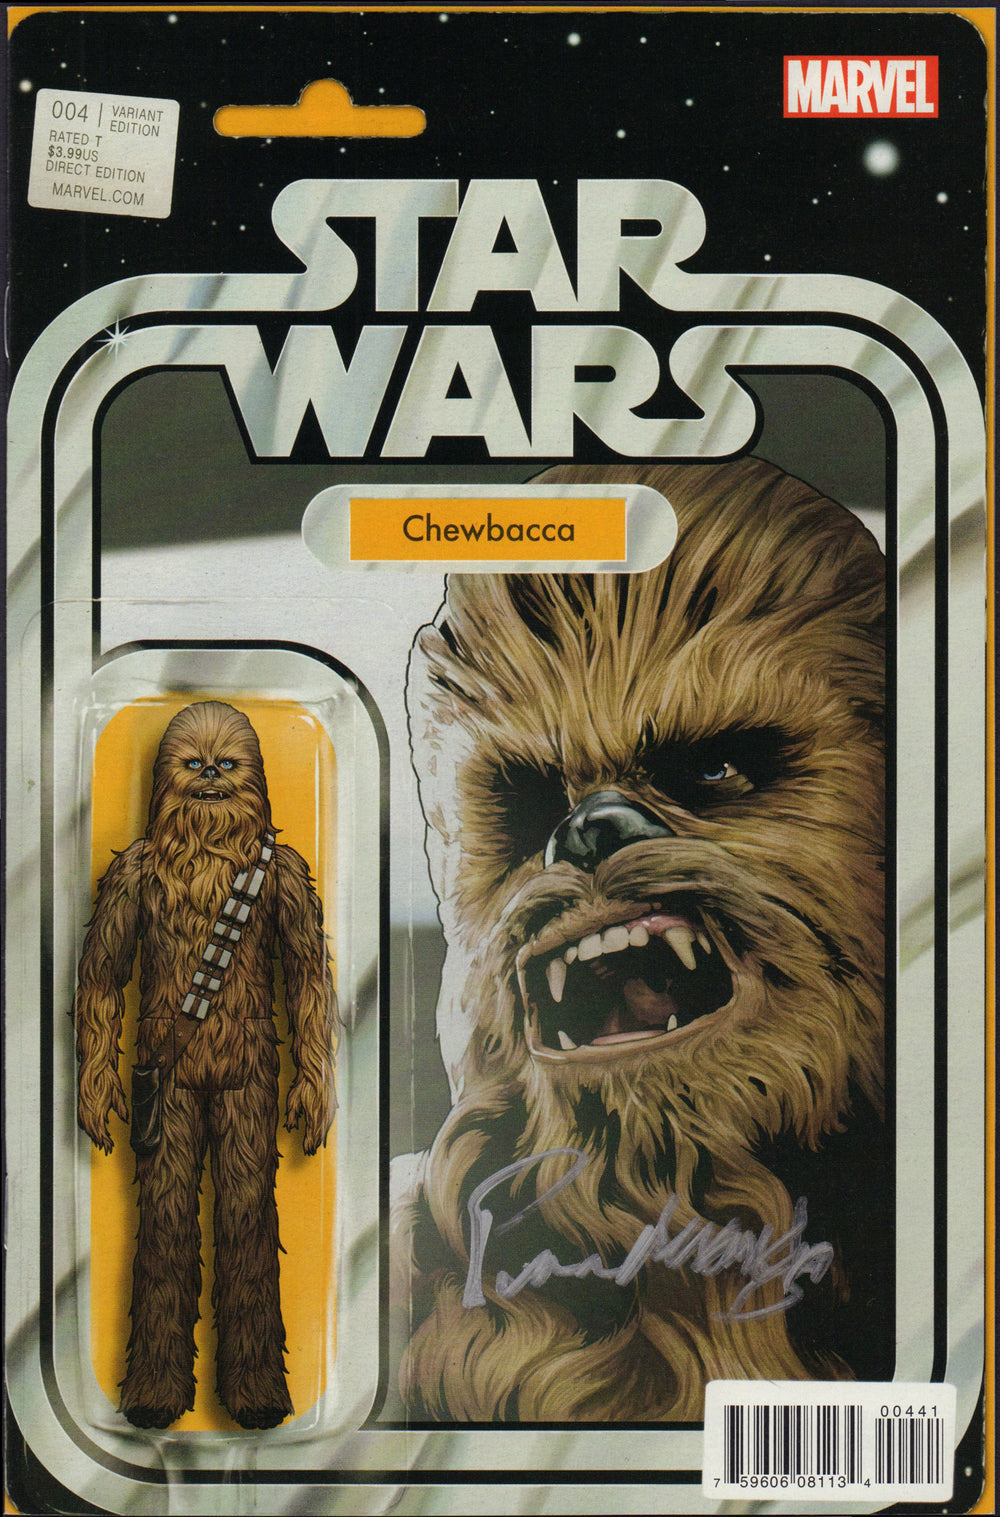 Star Wars Chewbacca #4 Action Figure Variant Comic Book - Signed by Actor Peter Mayhew